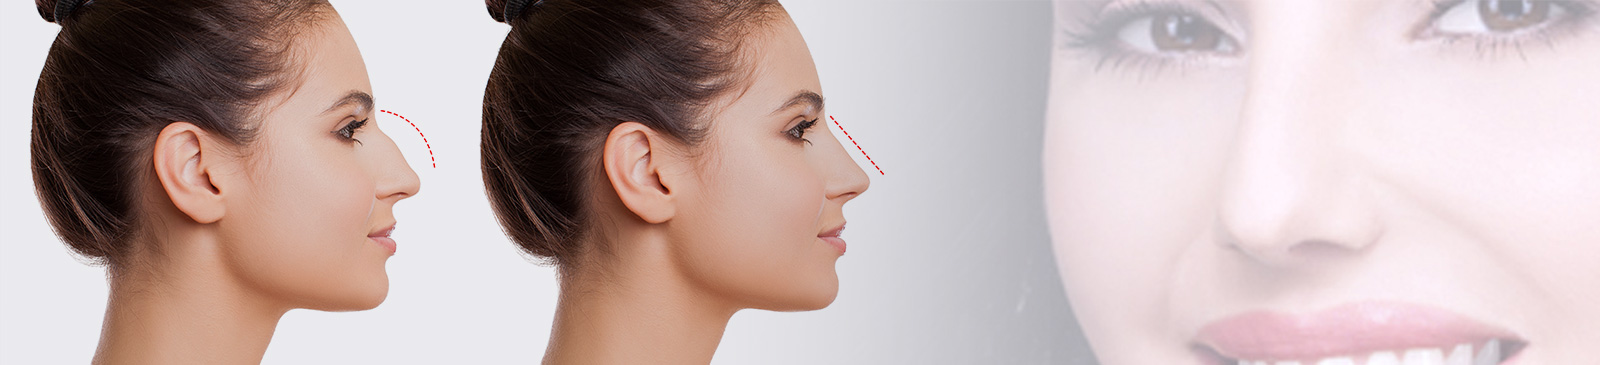 nose operation in bangalore